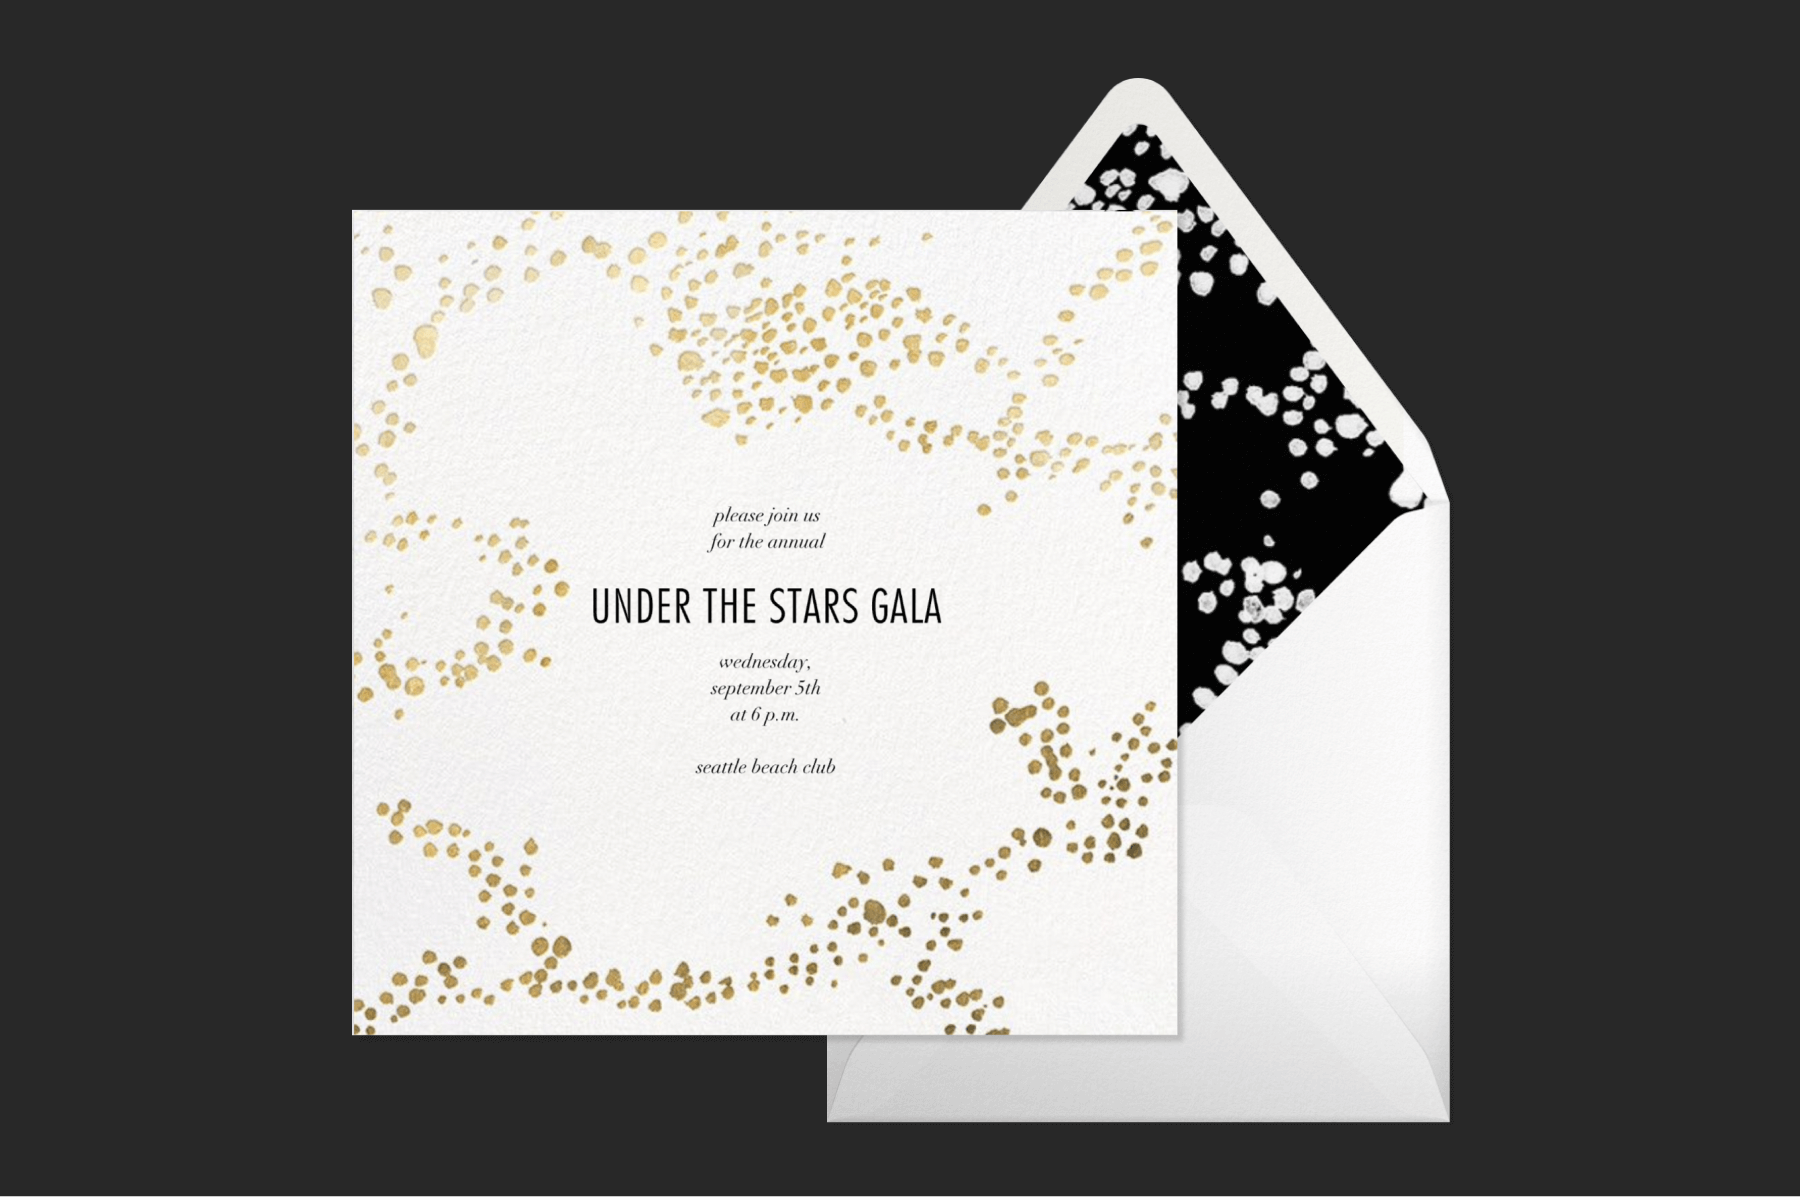 An “under the stars gala” invitation with gold speckles in an abstract pattern beside a white envelope with black and white liner.